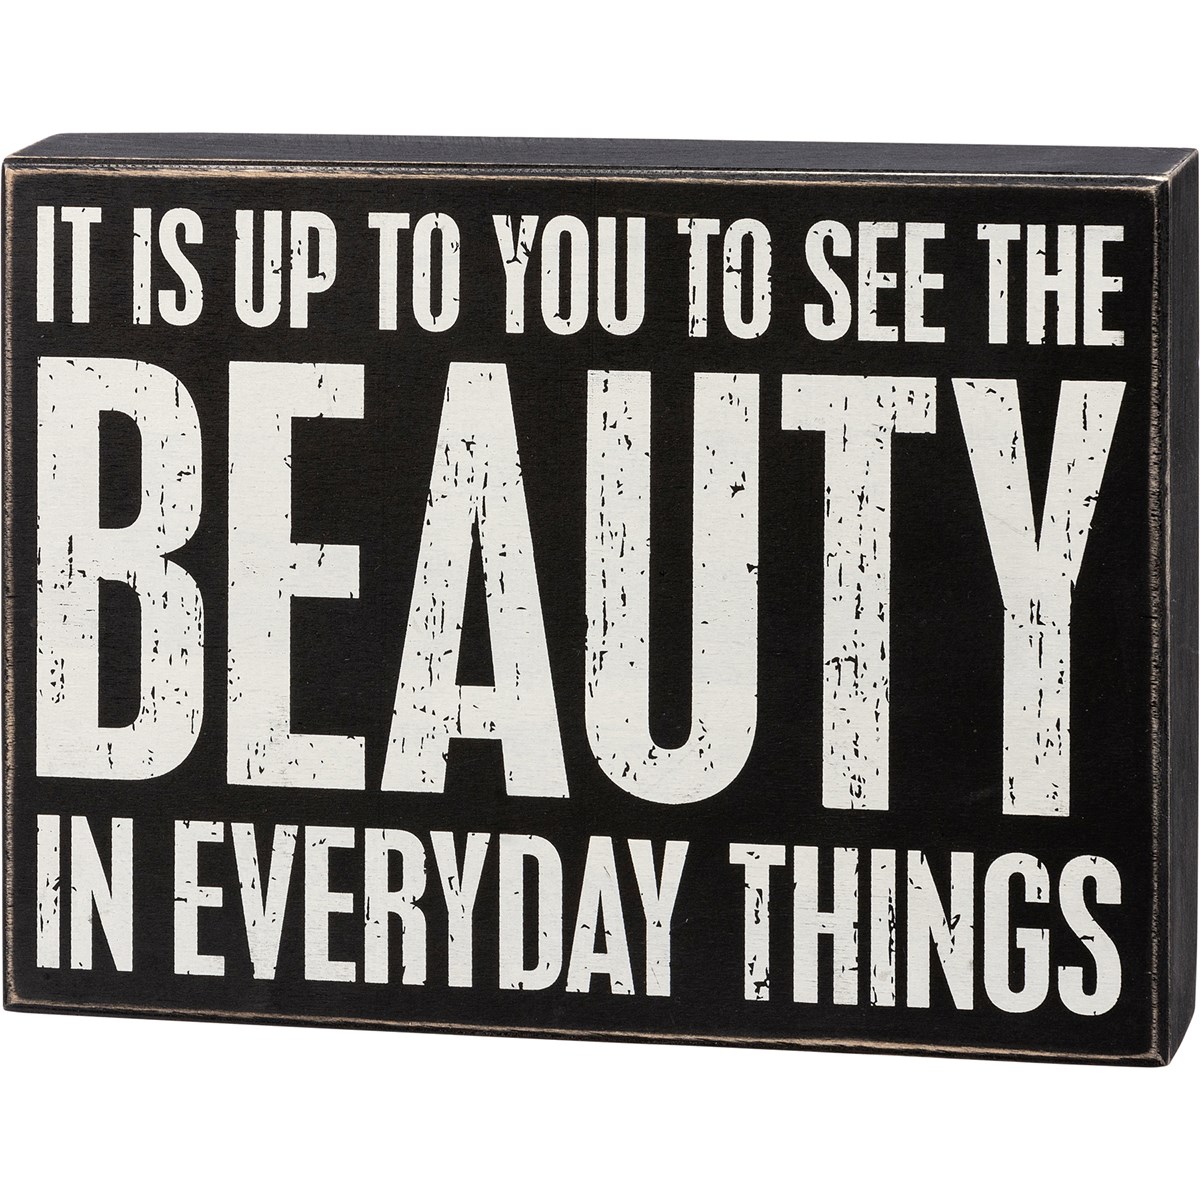 See The Beauty In Everyday Things Box Sign - Wood